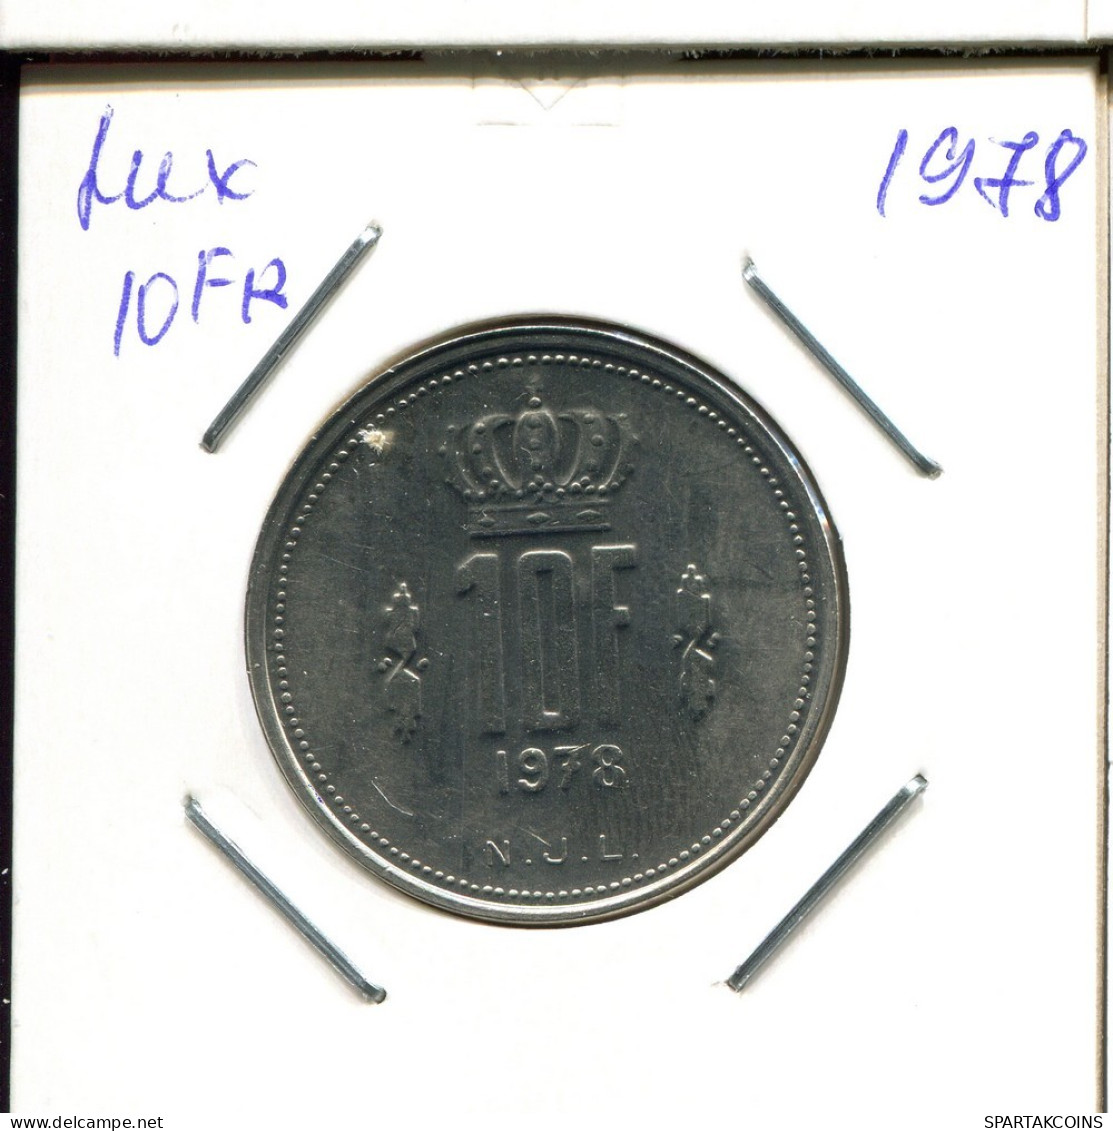 10 FRANCS 1978 LUXEMBURGO LUXEMBOURG Moneda #AT243.E.A - Luxemburg